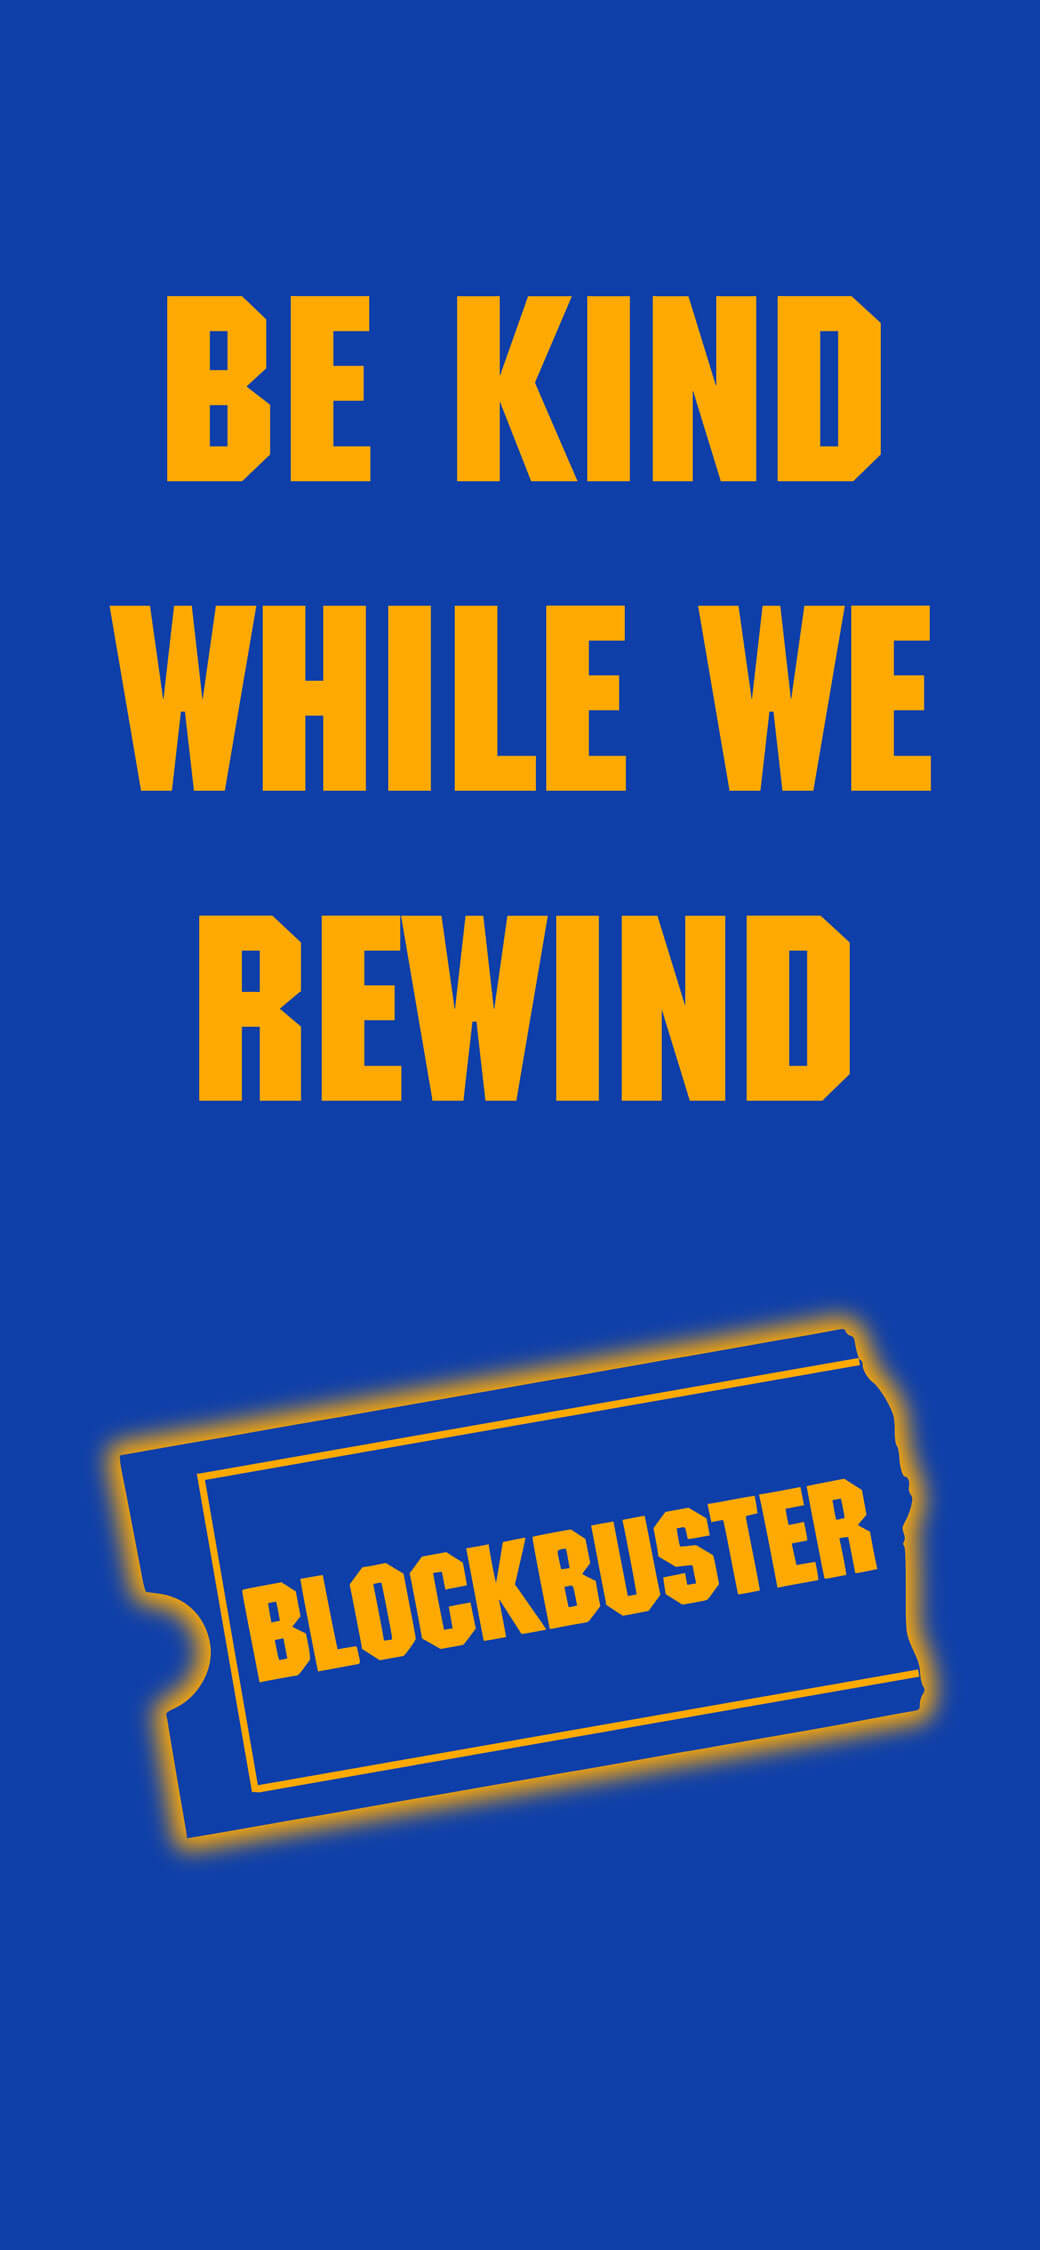 Blockbuster: We are working on rewinding your movie.